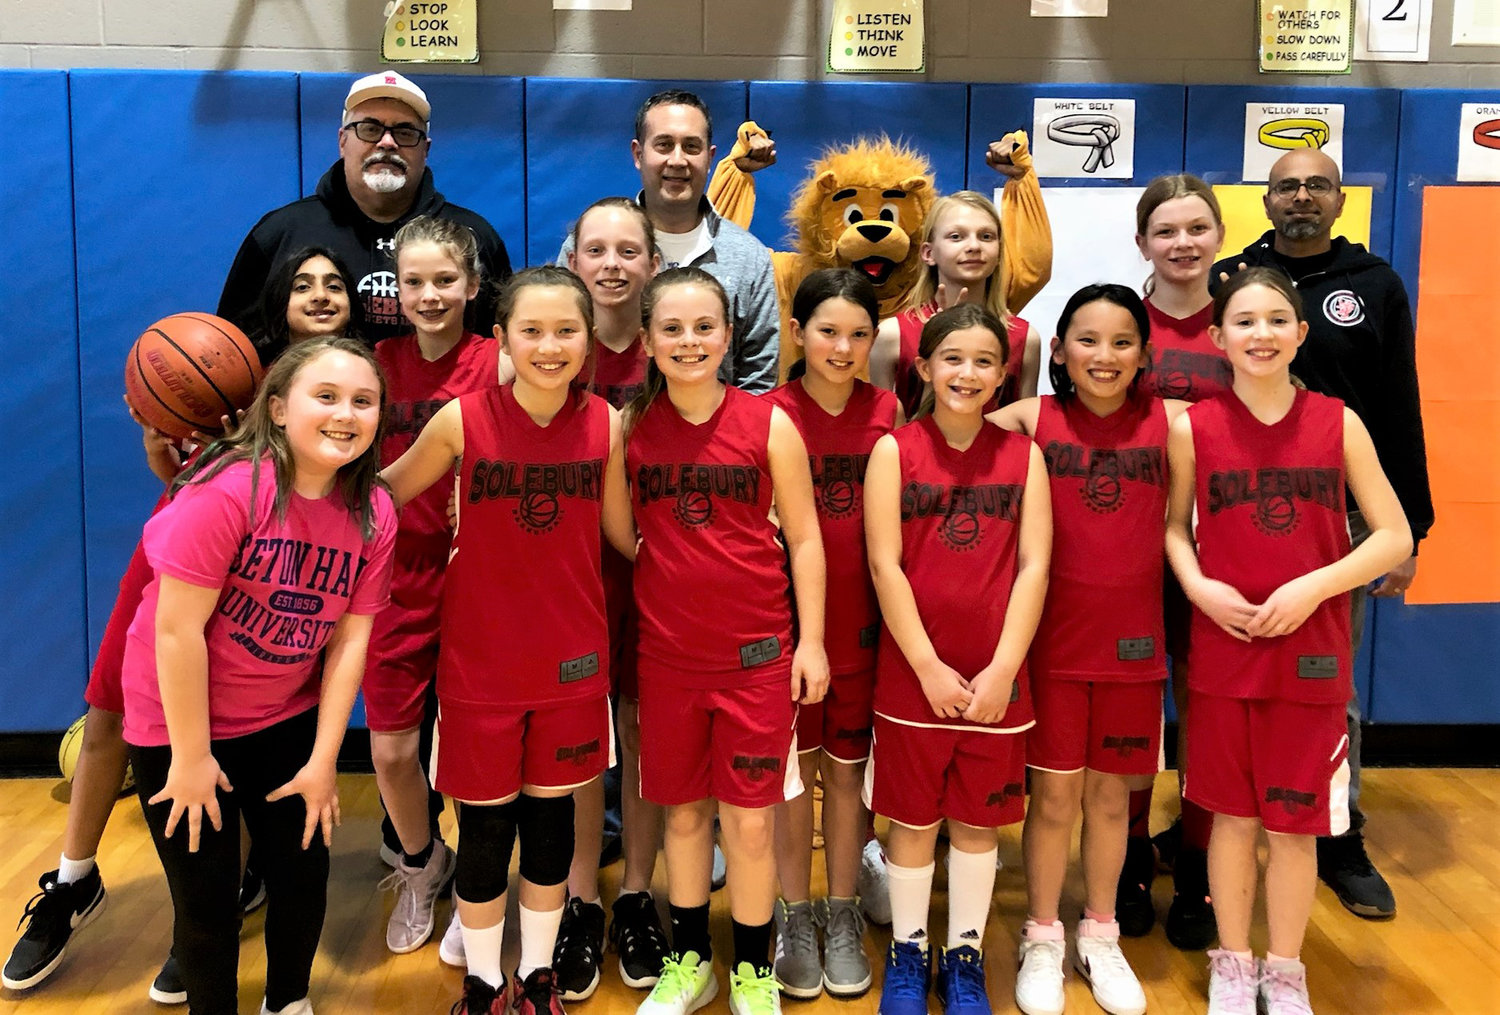 The Solebury Parks and Recreation girls travel basketball team.